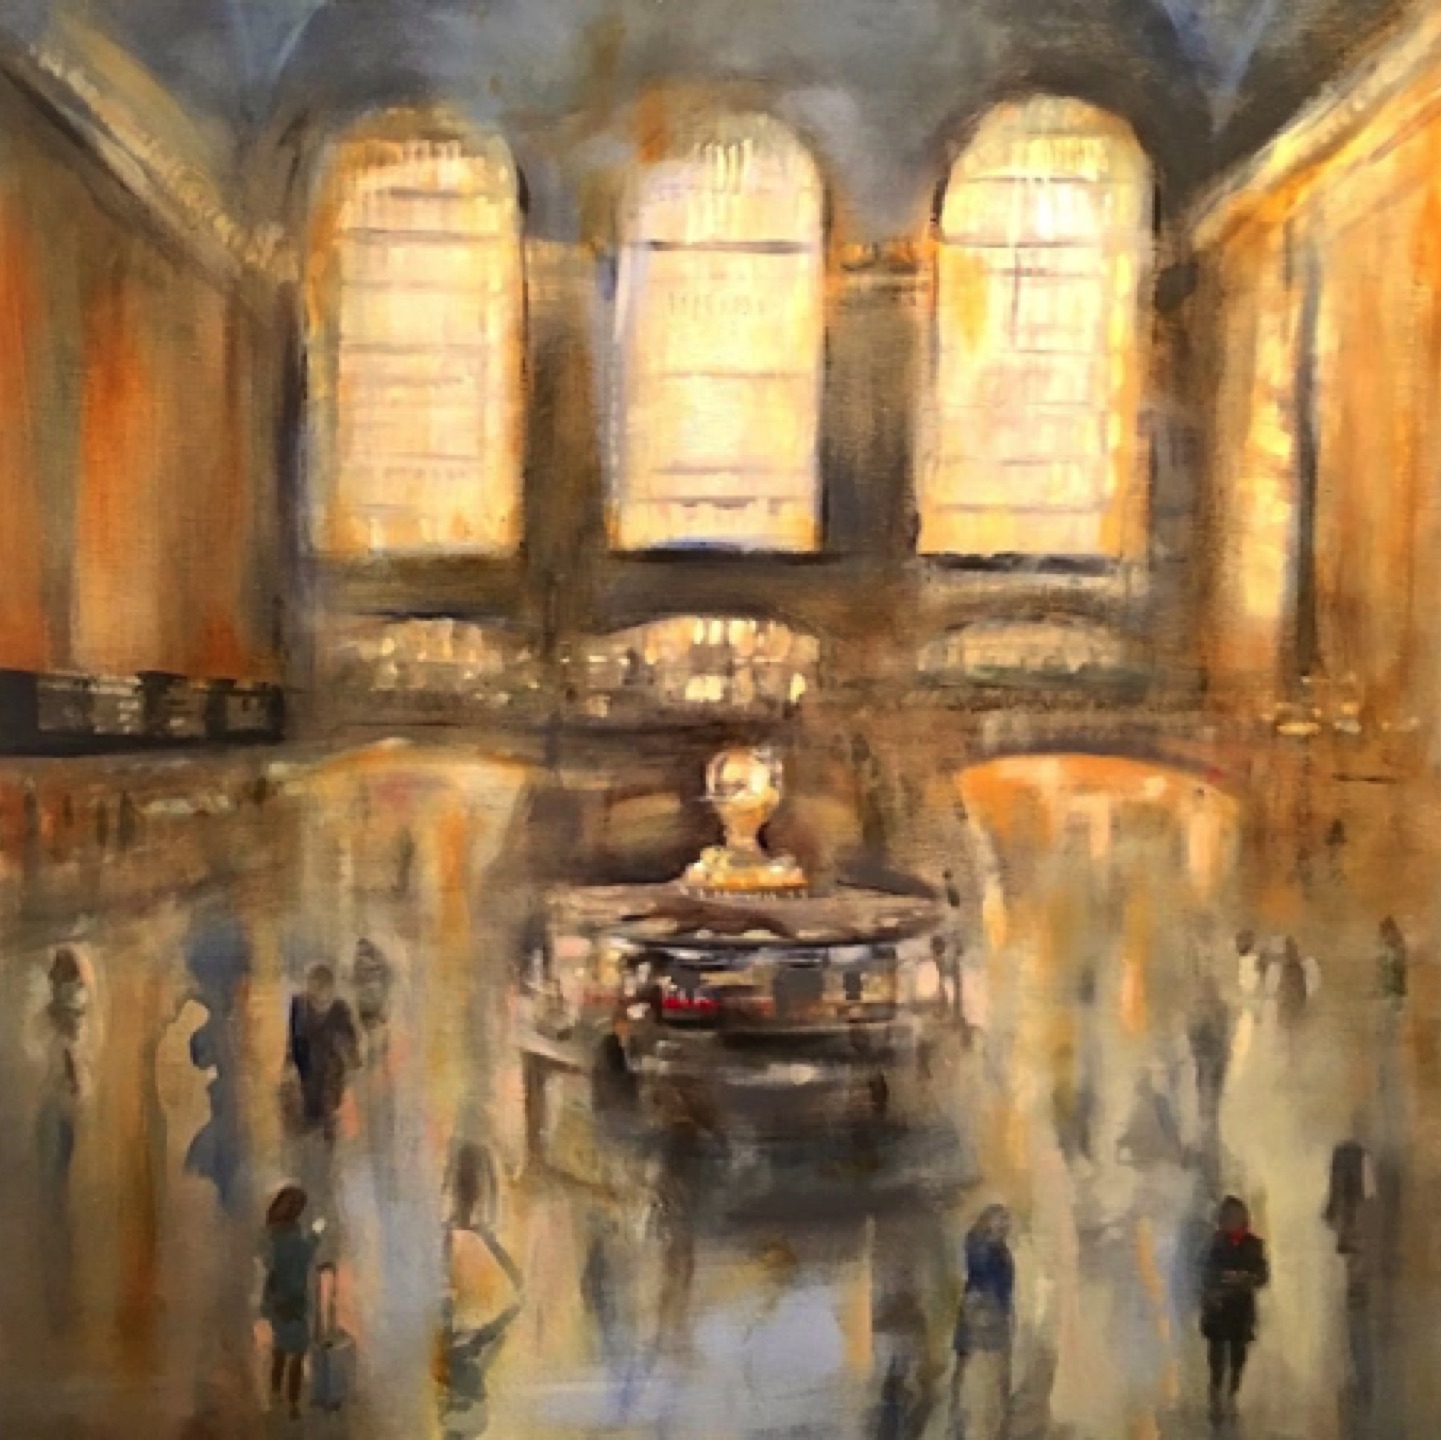 Gregg Chadwick
The Beehive -Grand Central
30"x30" oil on linen 2018
Private Collection, New Haven, Connecticut